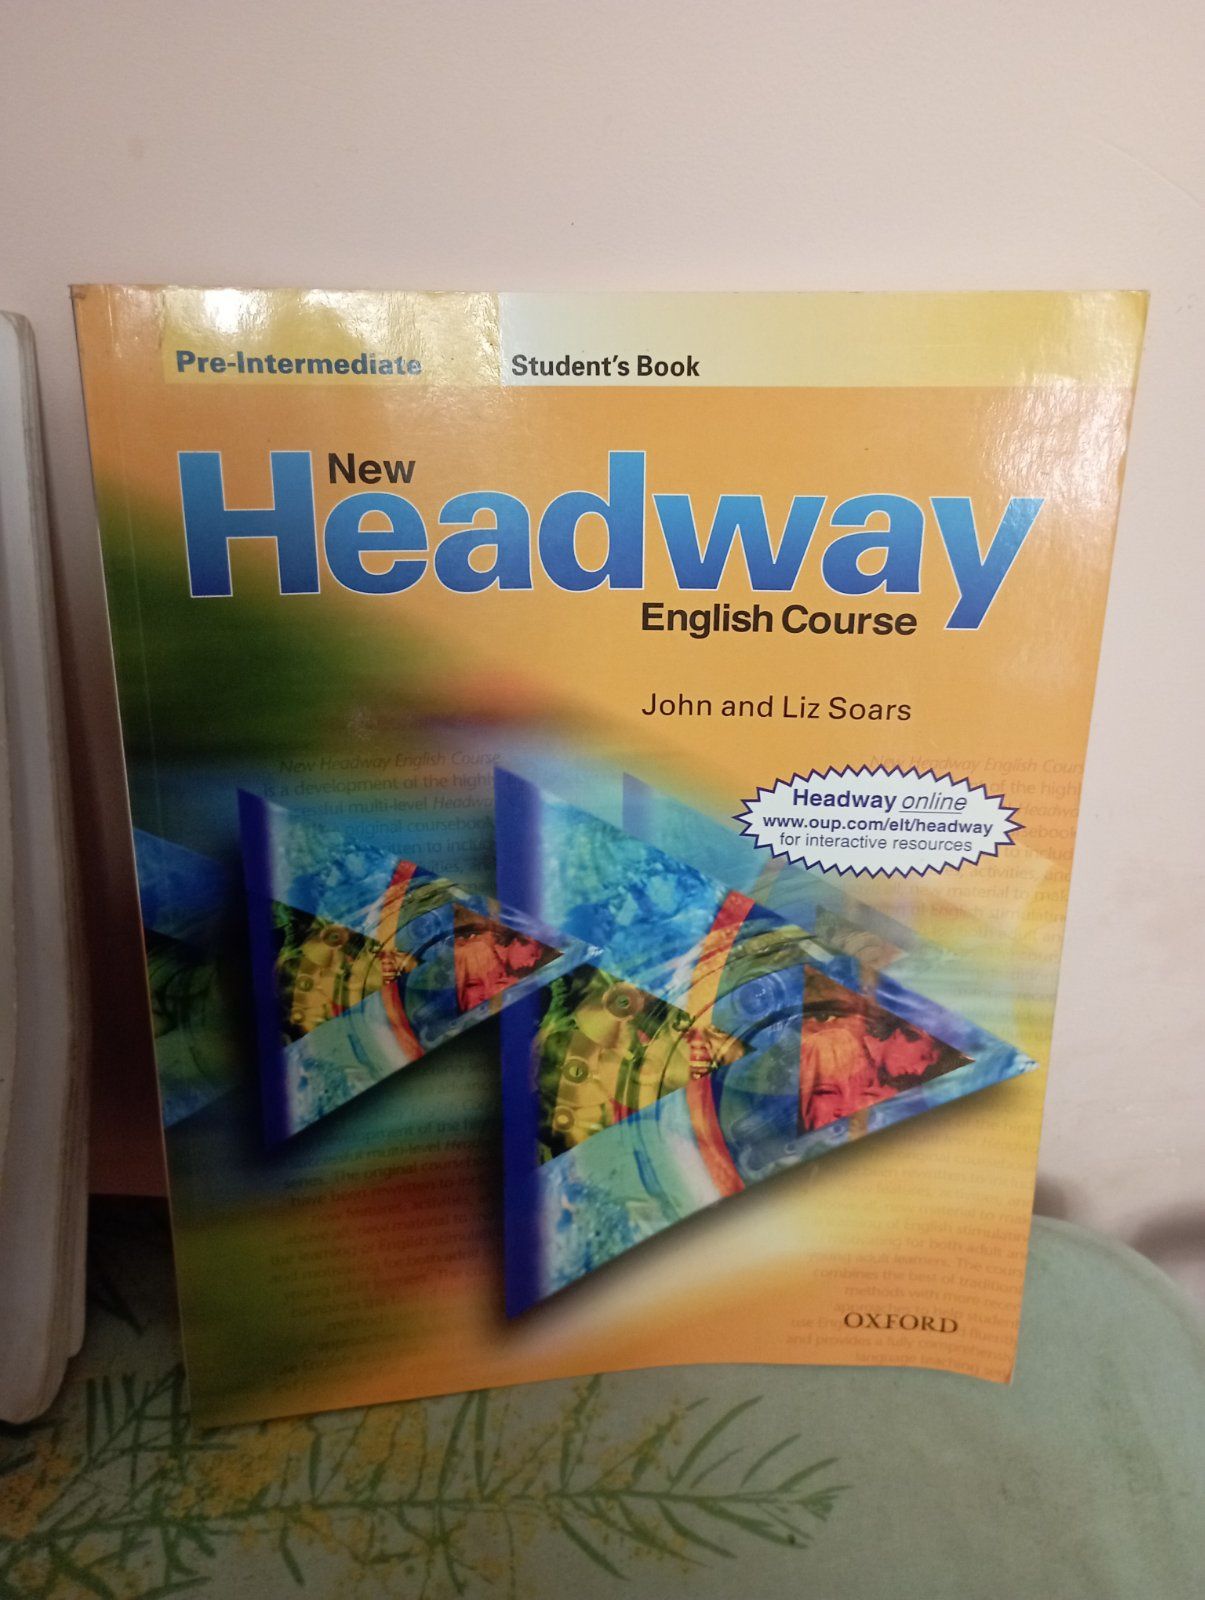 Headway english course